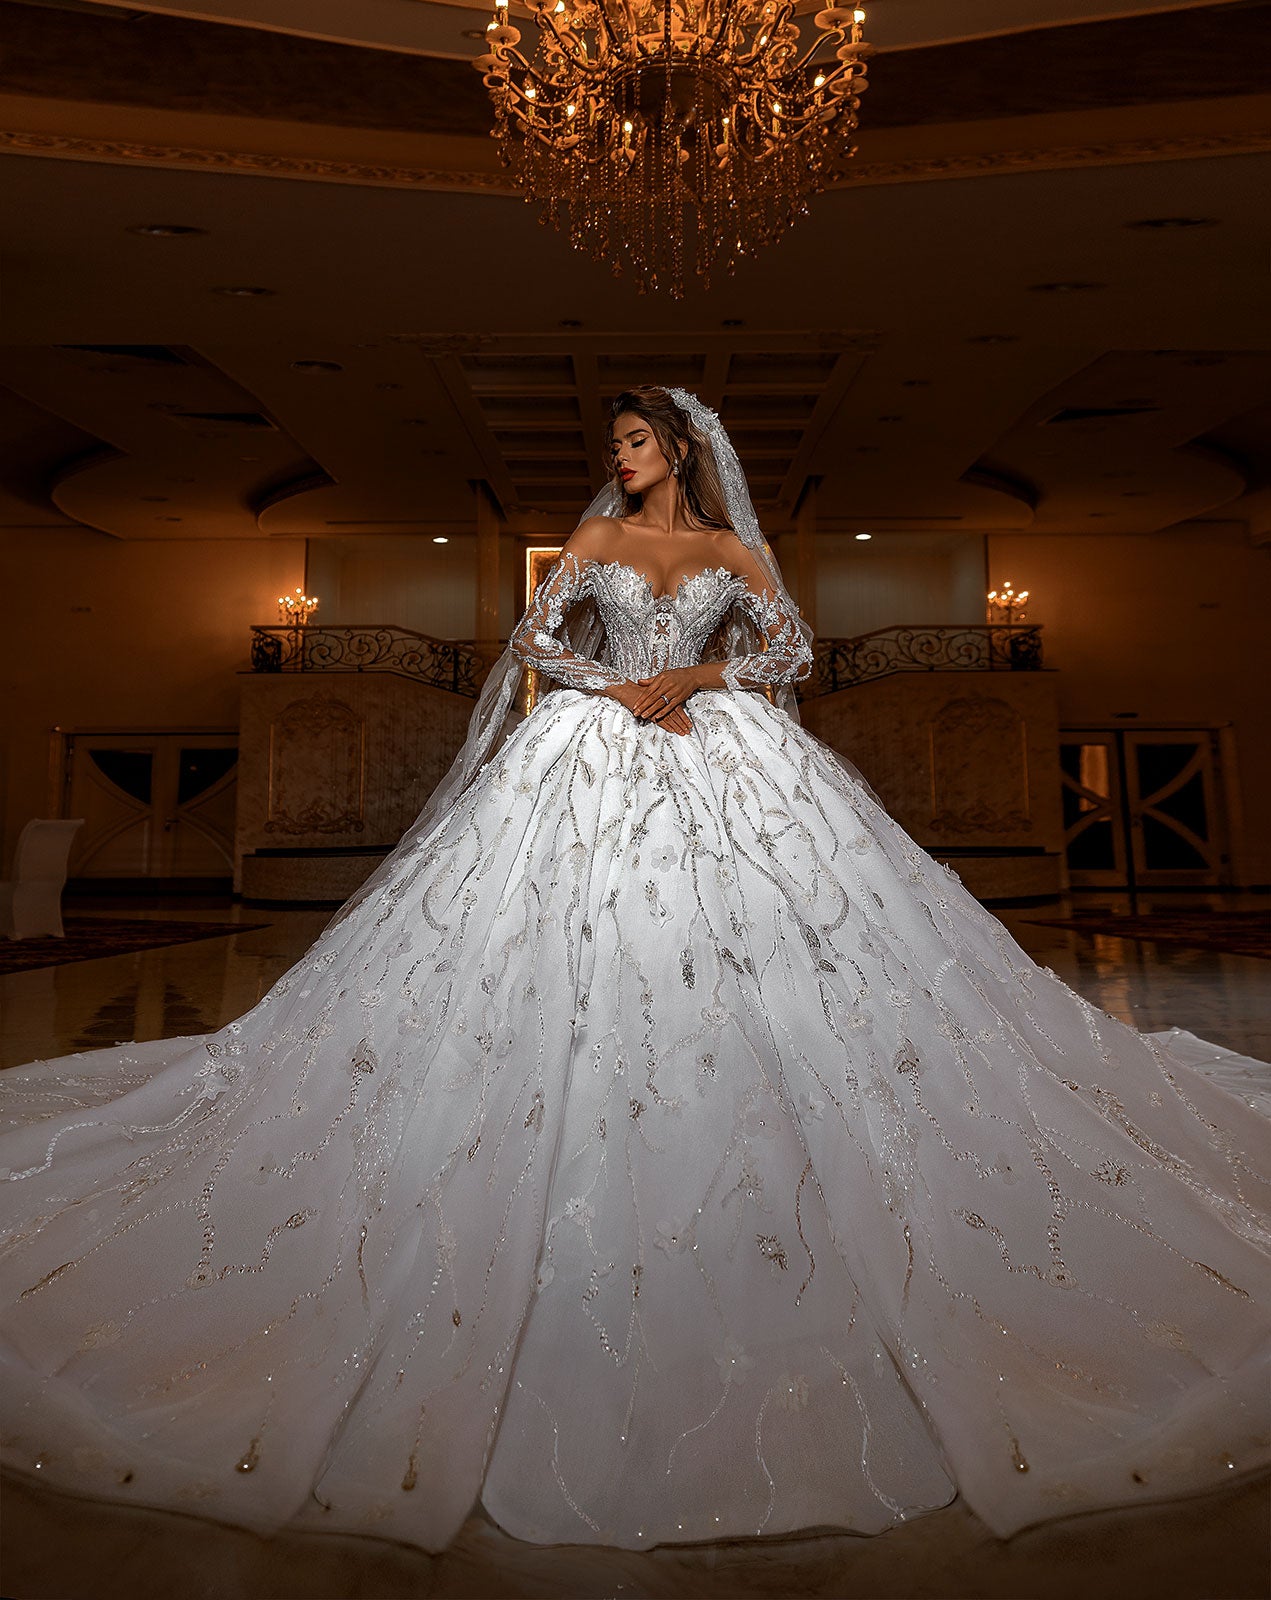 Bridal Ball Gown – ALBINA DYLA